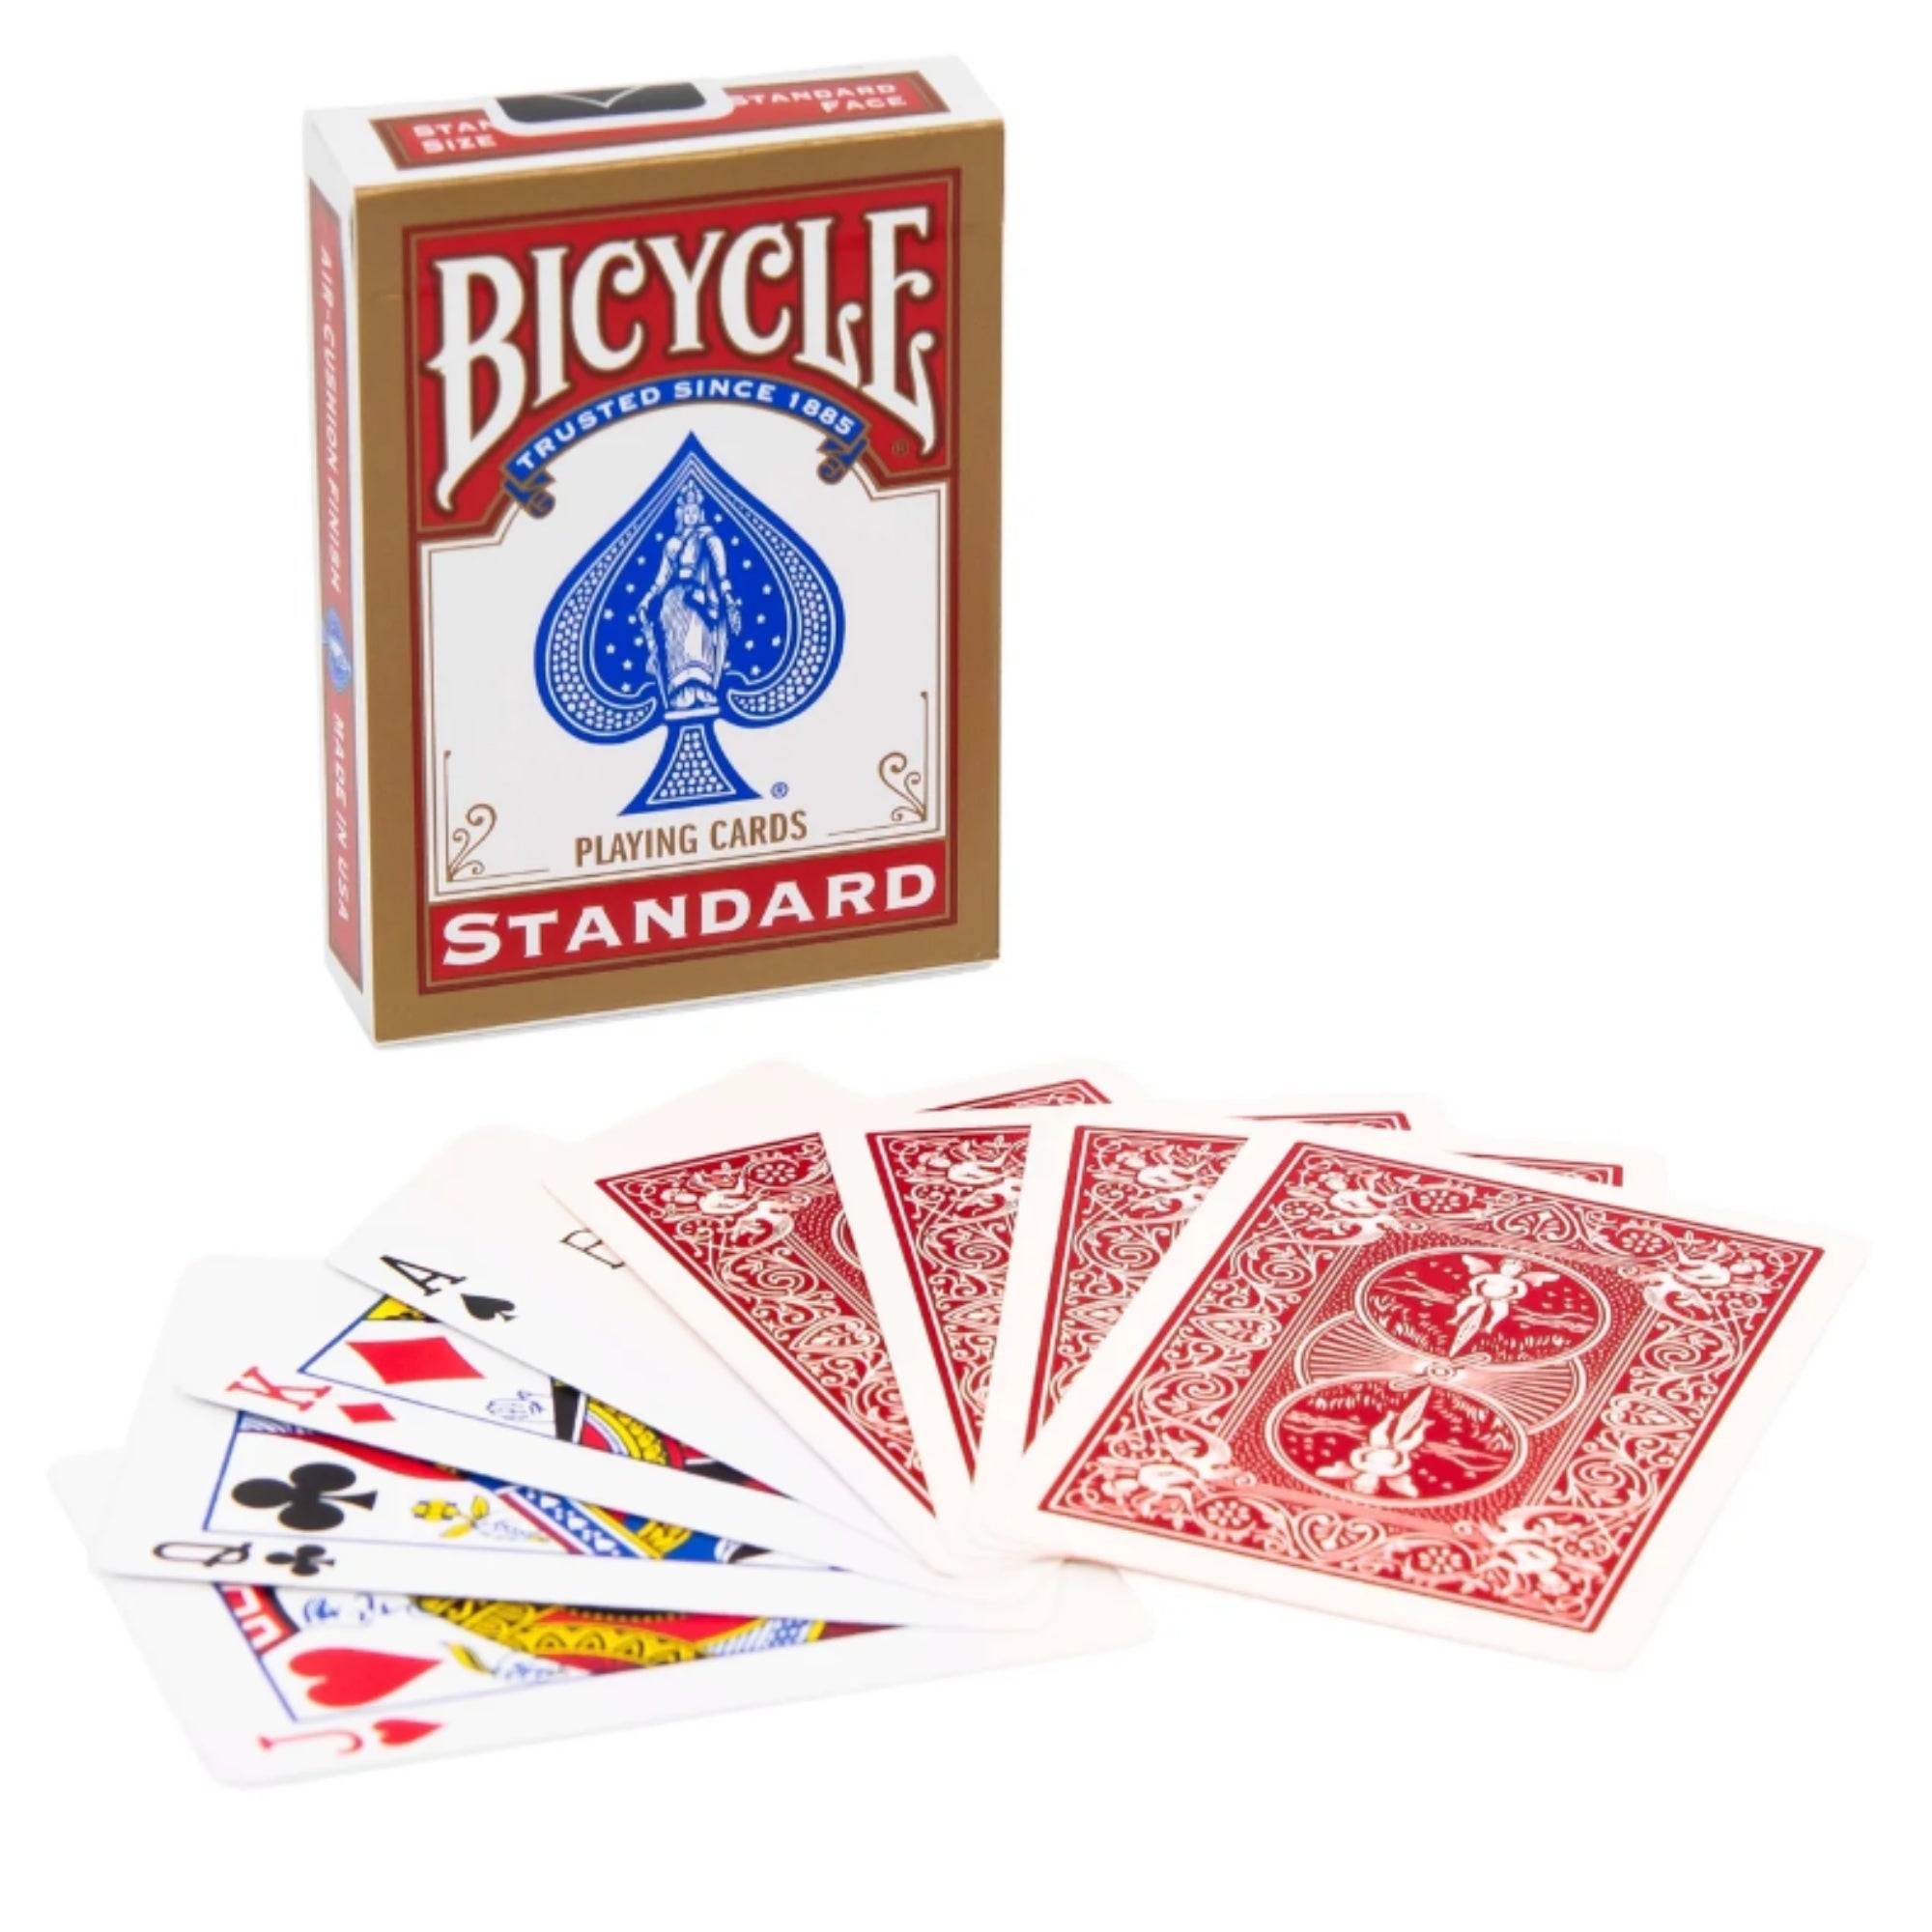 Bicycle Standard Deck red packet and cards